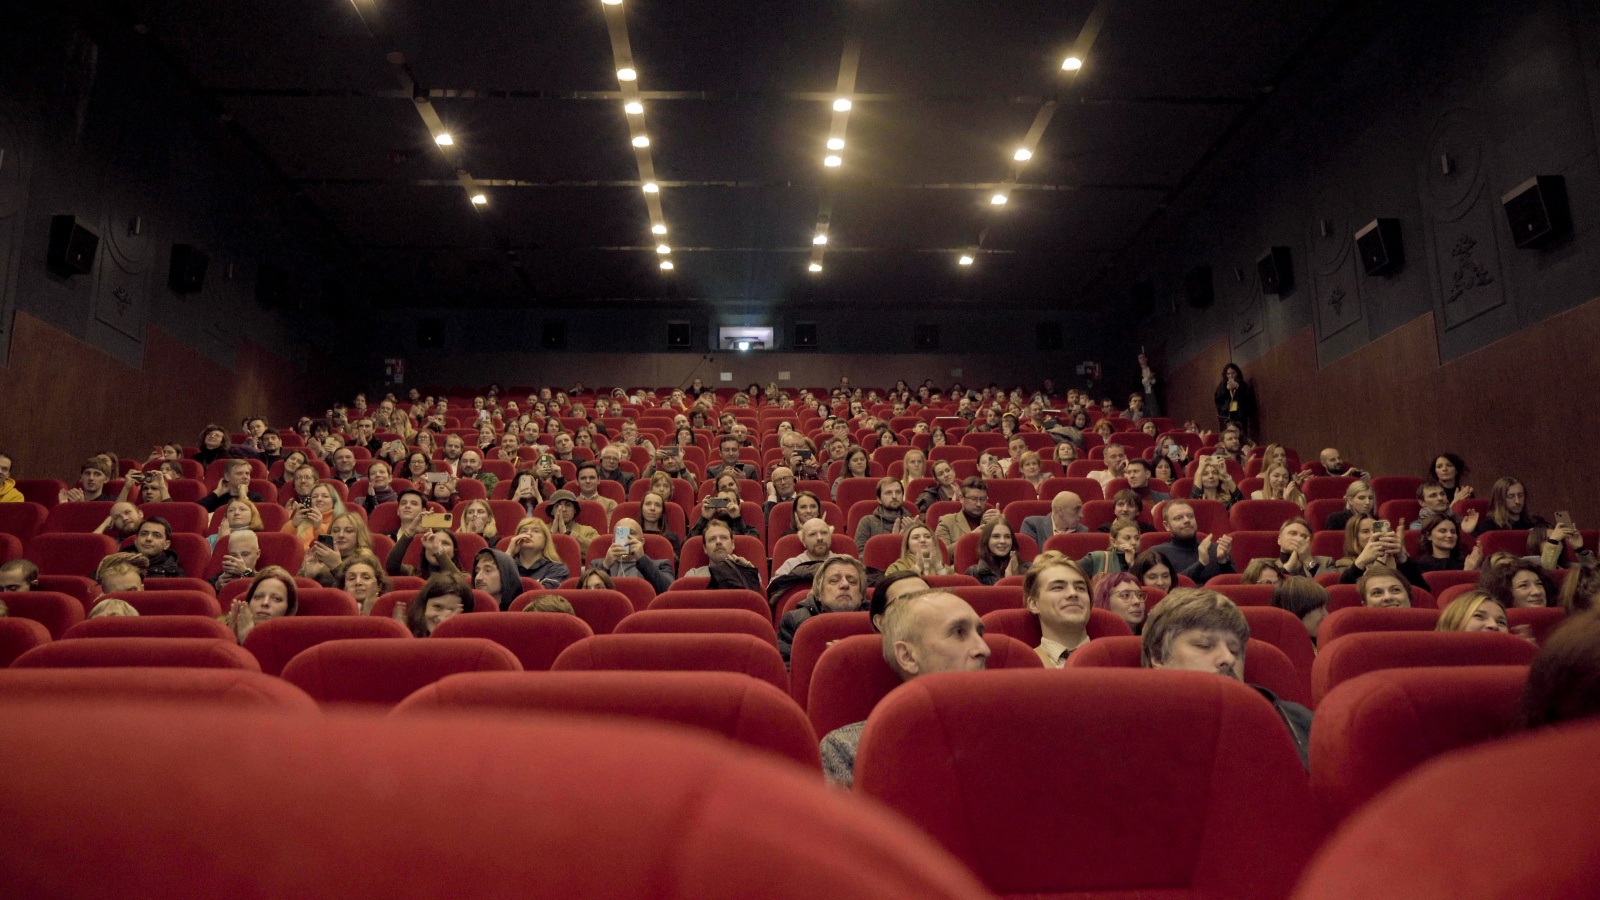 eng: People in the cinema theatre.